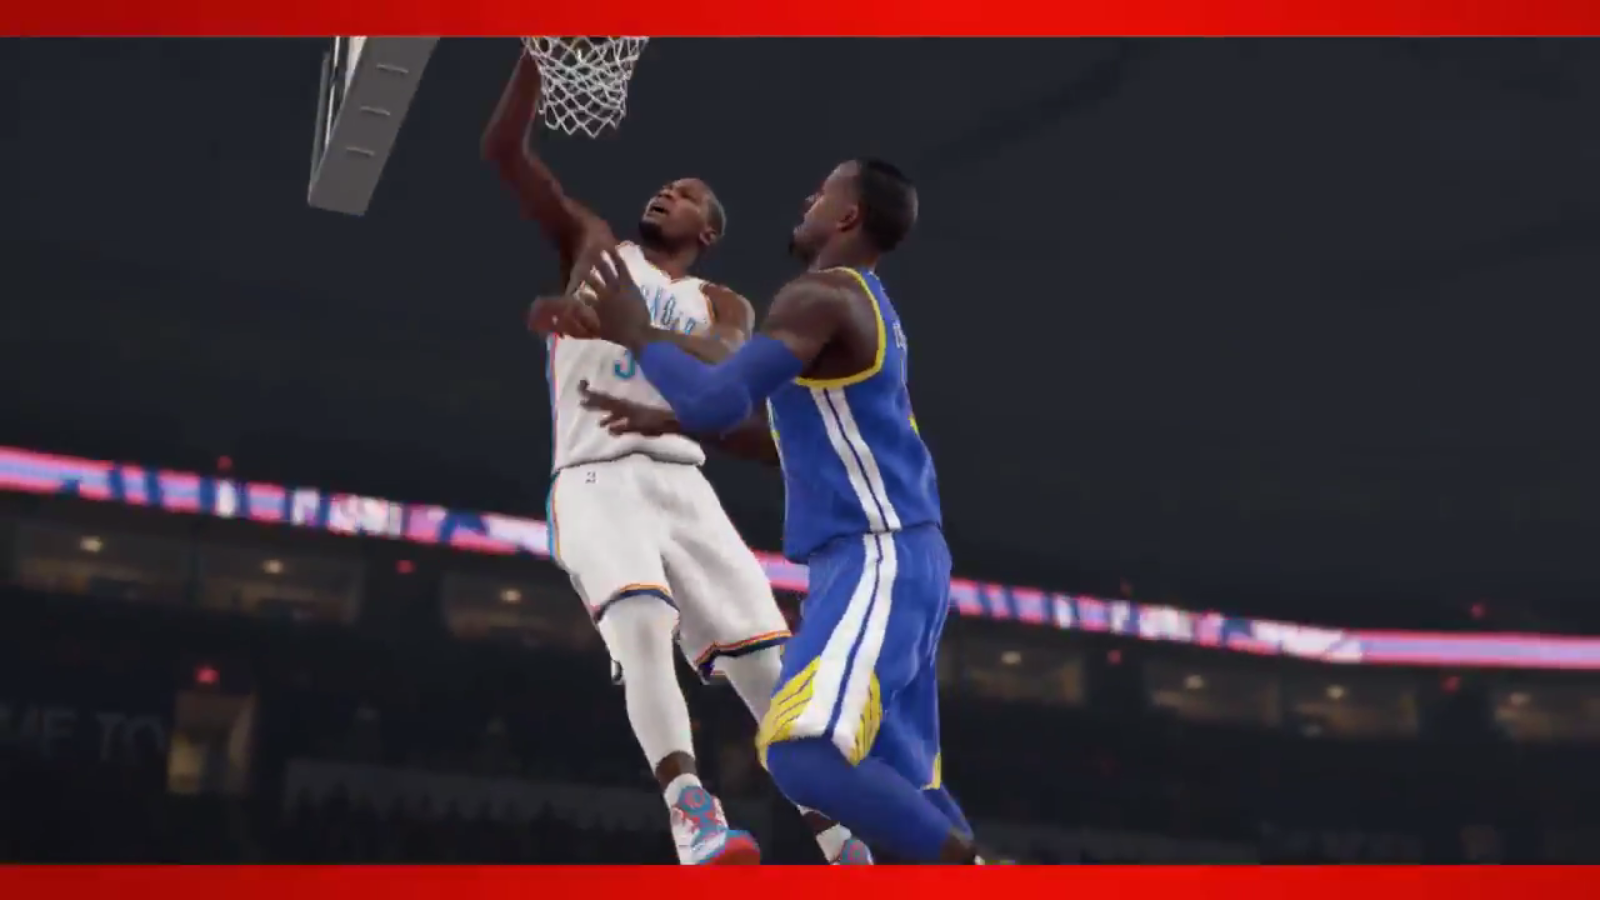 Stealthy Box | New NBA 2K15 Teaser Trailer Hits the Court